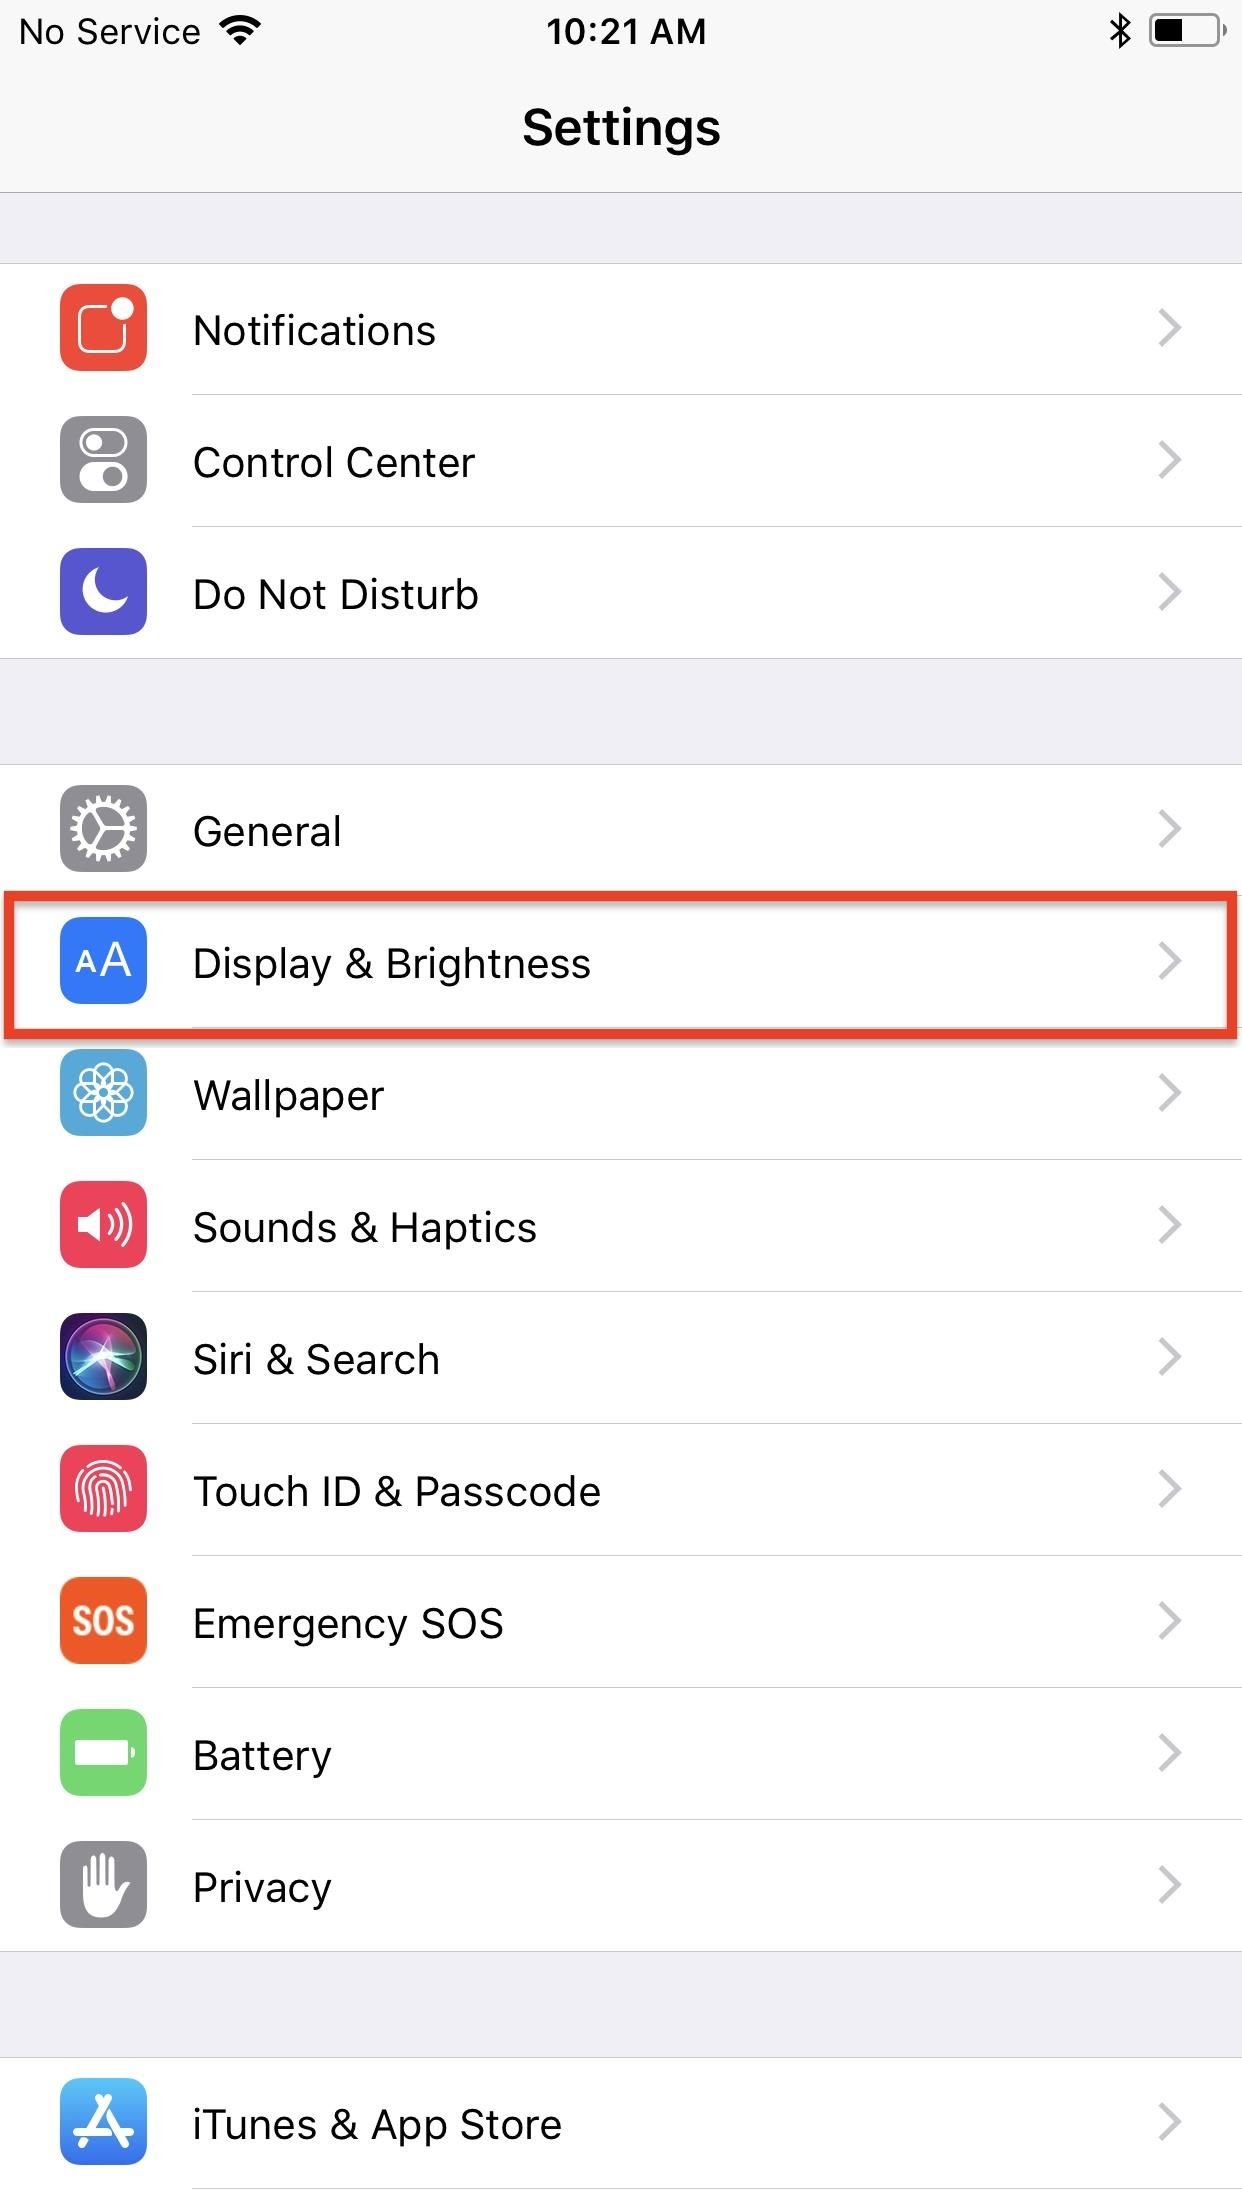 How to Disable the True Tone Display on Your iPhone 8, iPhone 8 Plus, or iPhone X